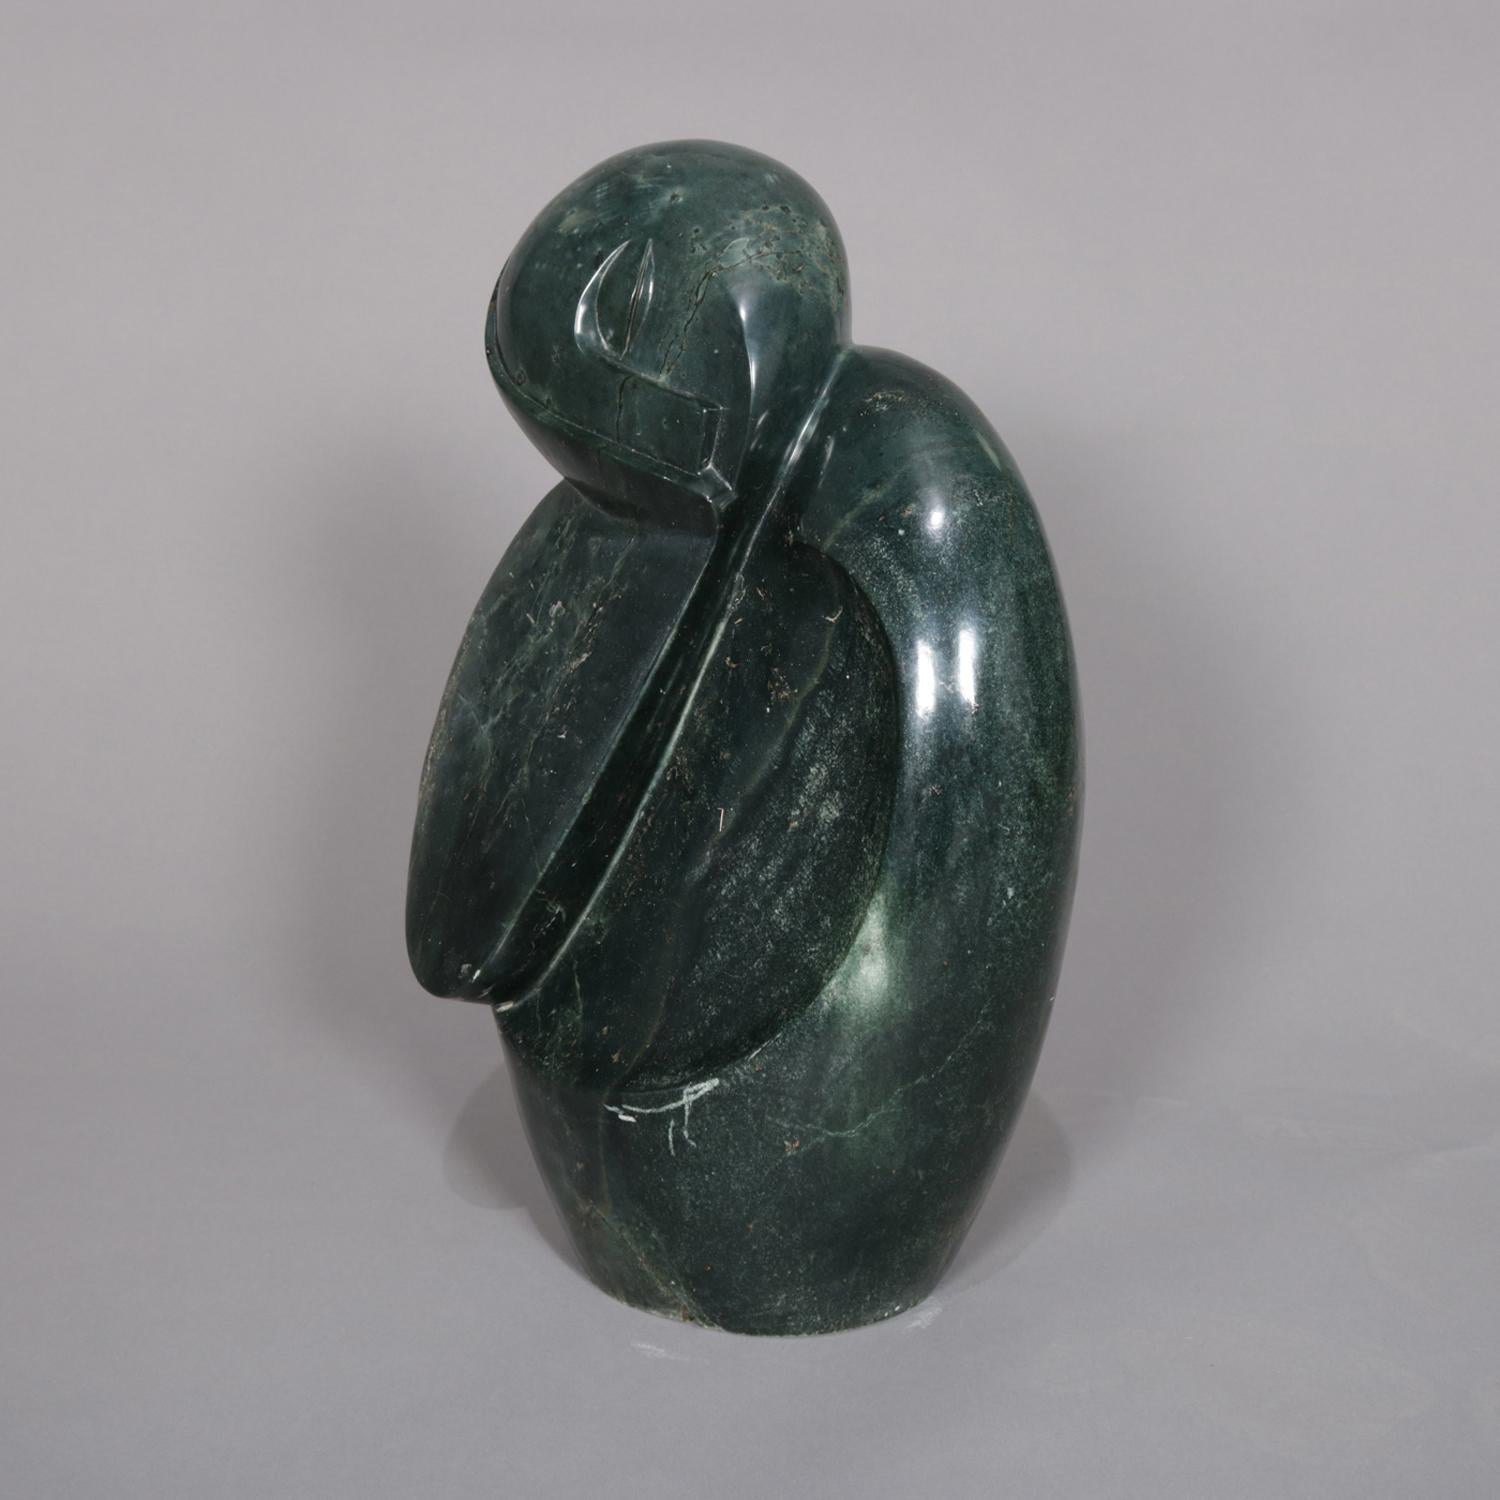 Hand-Carved Tribal Alaskan Inuit Abstract Carved Stone Sculpture, Stylized Woman